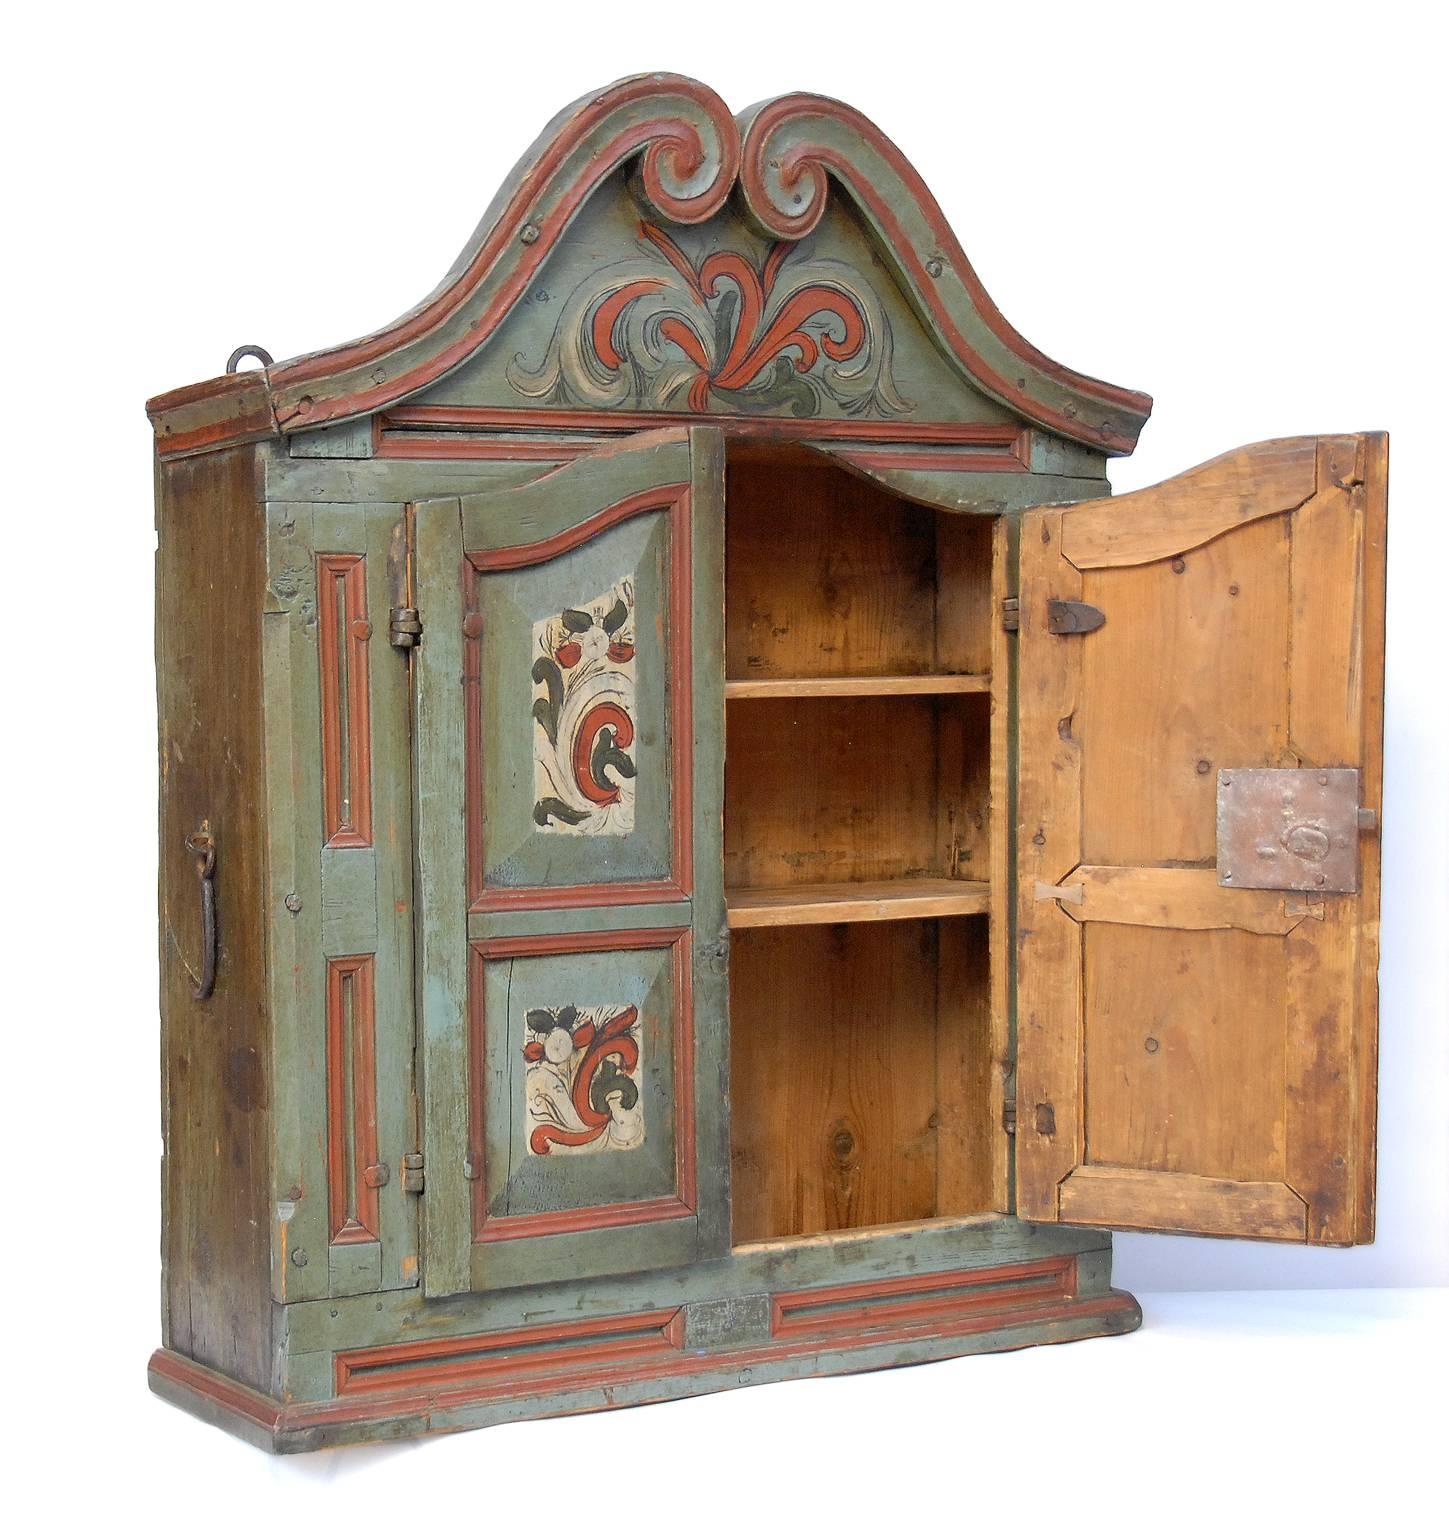 A 19th century rosepainted hanging cupboard from Numedal, Norway. With original lock, key and ironsuspensions.